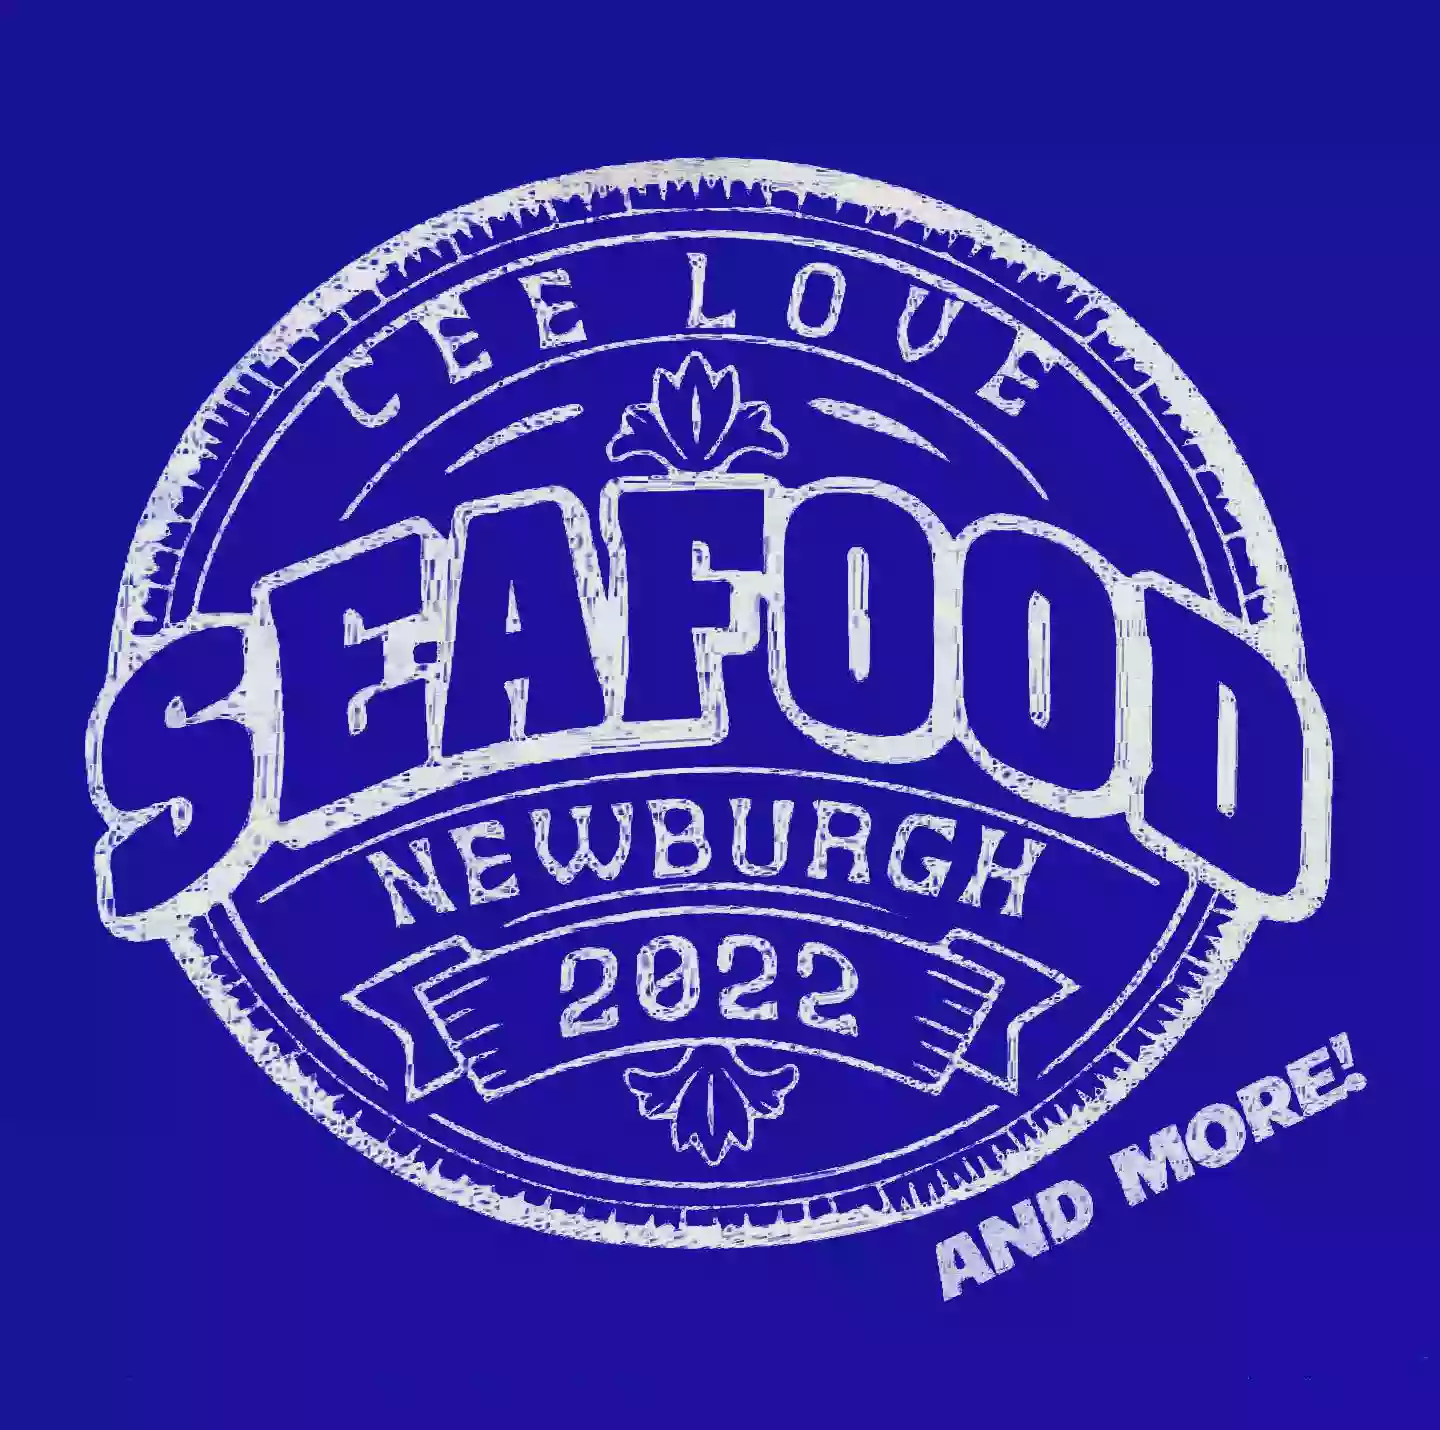 Cee Love Seafood and More